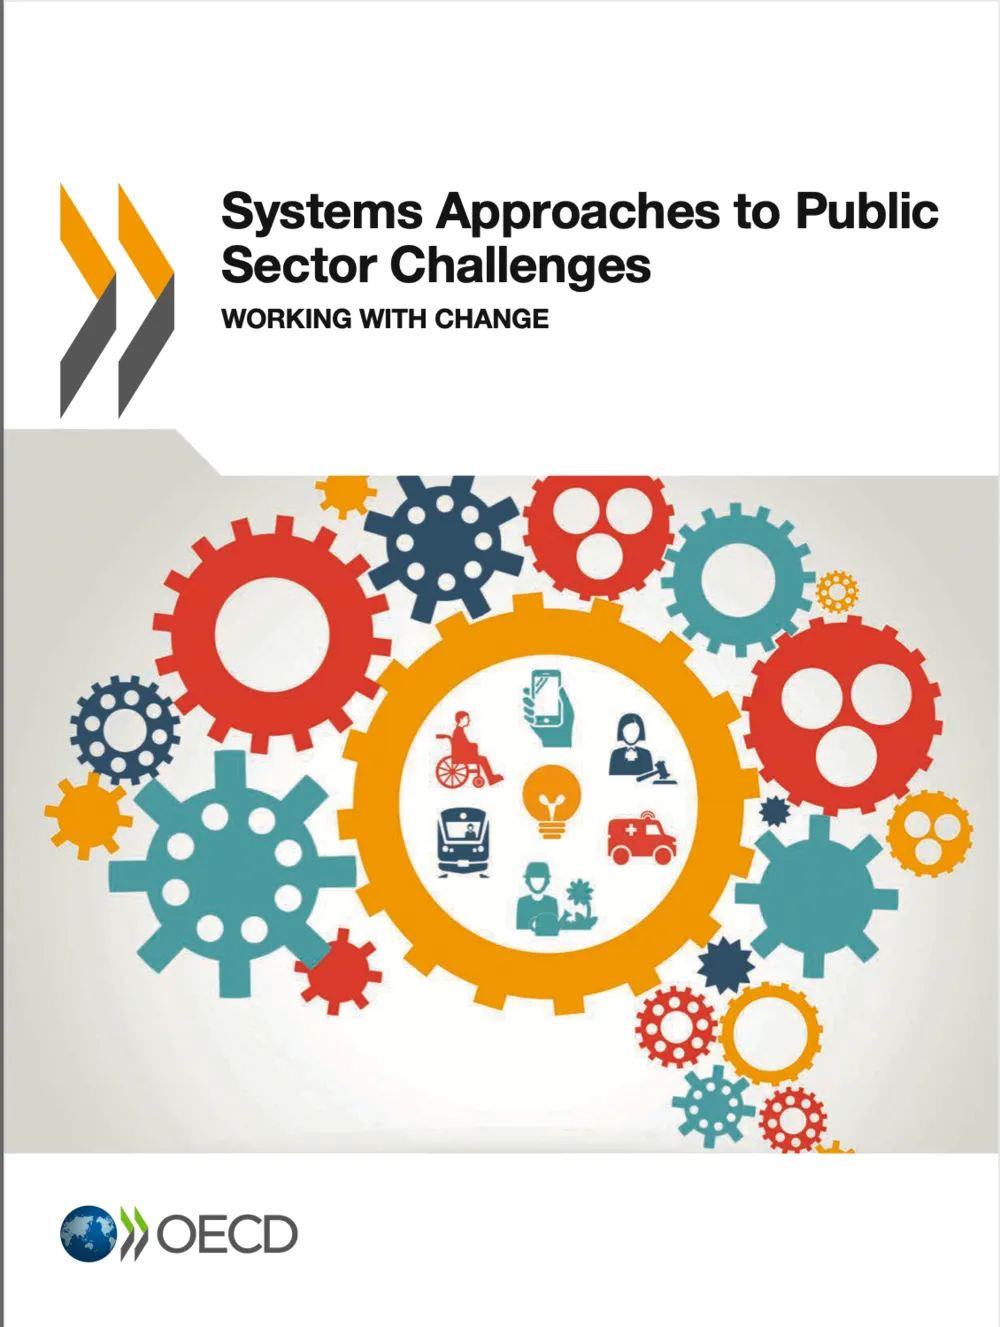 Toolkit 3—13. Systems Approaches to Public Sector Challenges